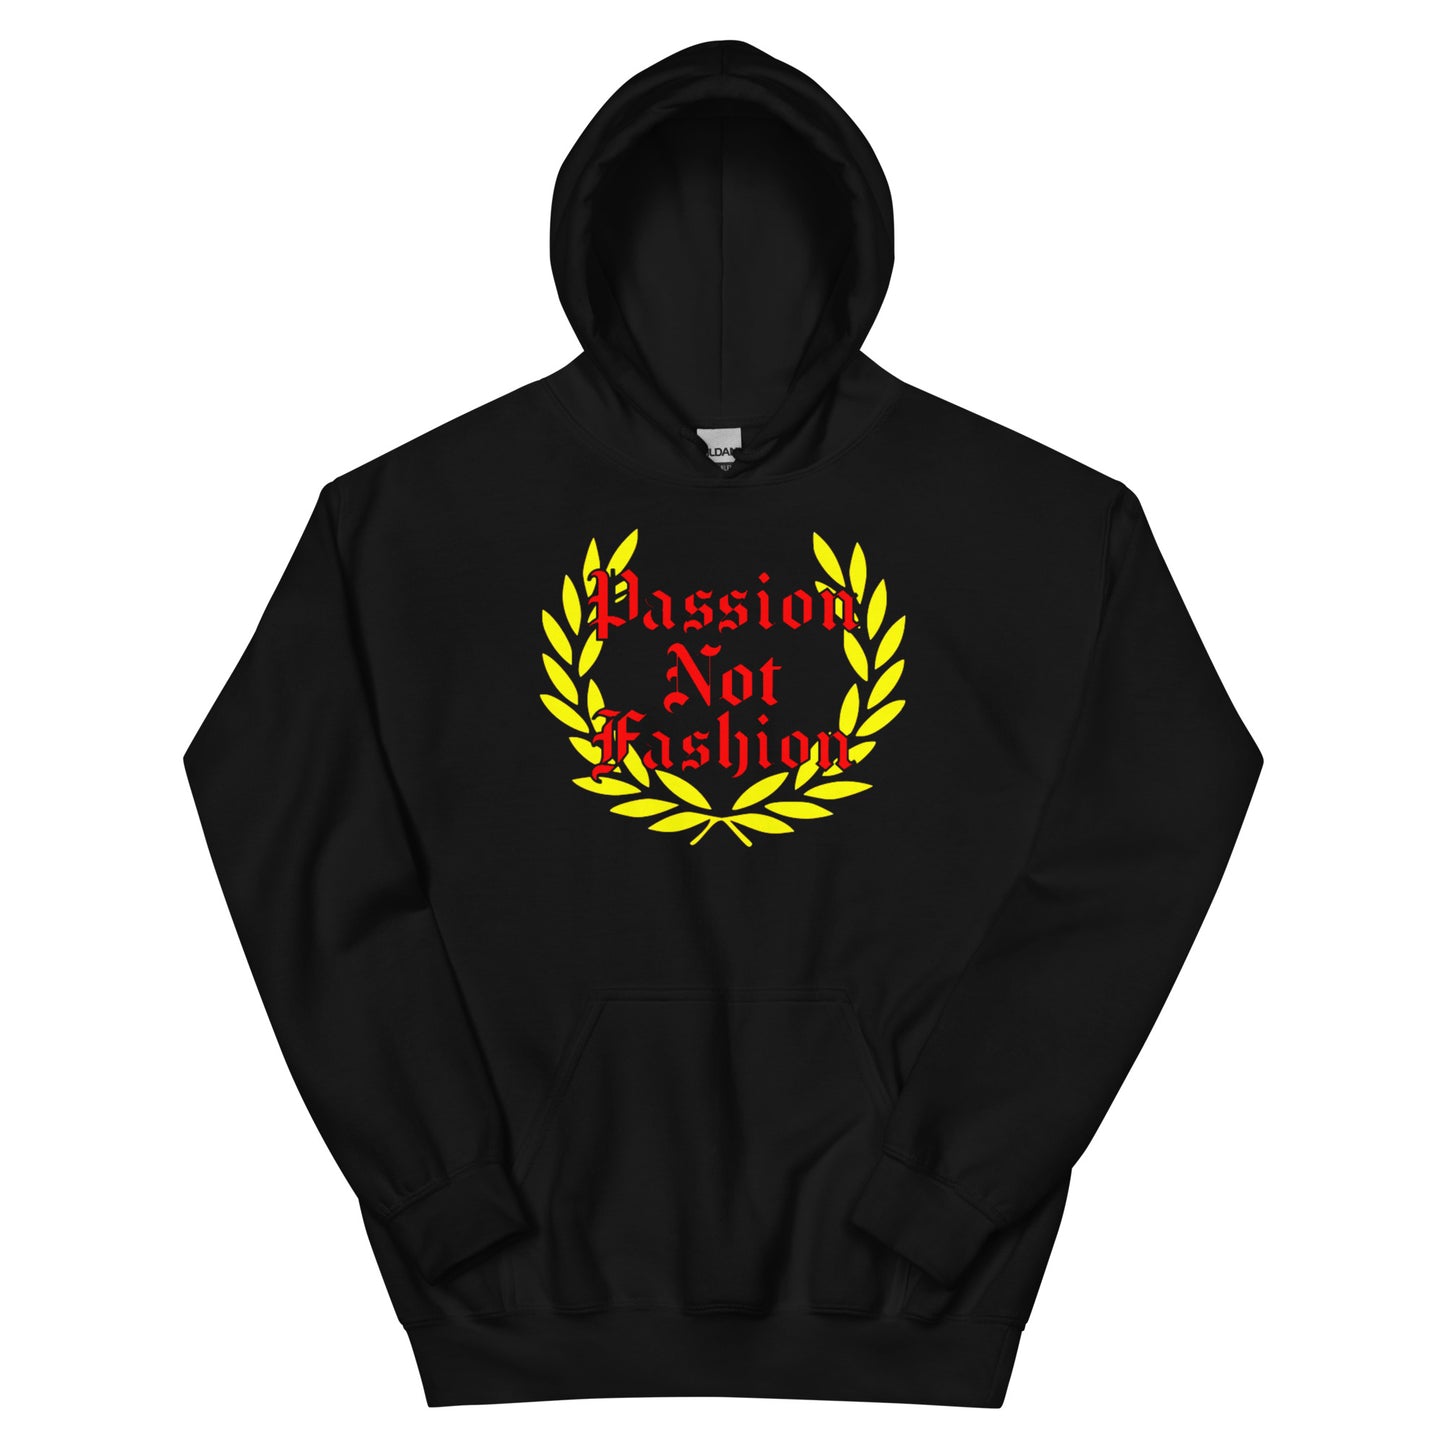 Boots Or Blood - Passion Not Fashion Hoodie